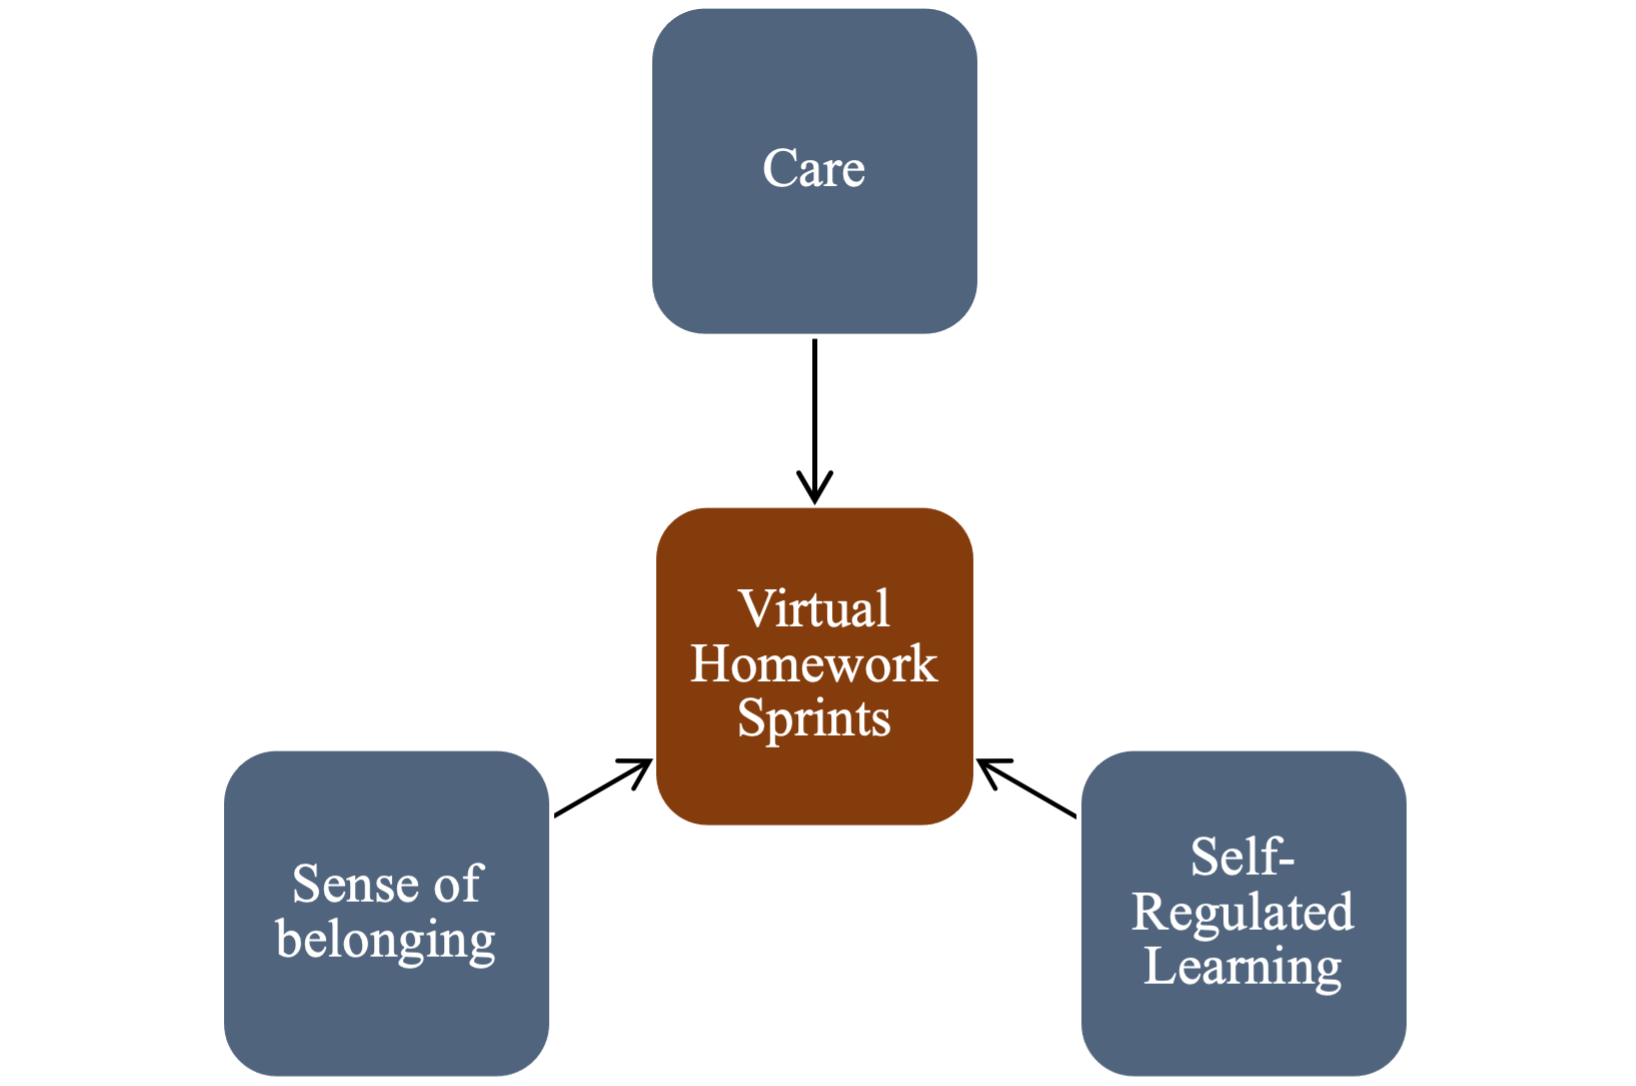 A diagram made up of 4 boxes. The main box in the middle is red and labeled "Virtual Homework Sprints". Three boxes above and on the side of the middle red box then have arrows pointing toward the middle box and are labeled: Care, Sense of Belonging, and Self-Regulated Learning.